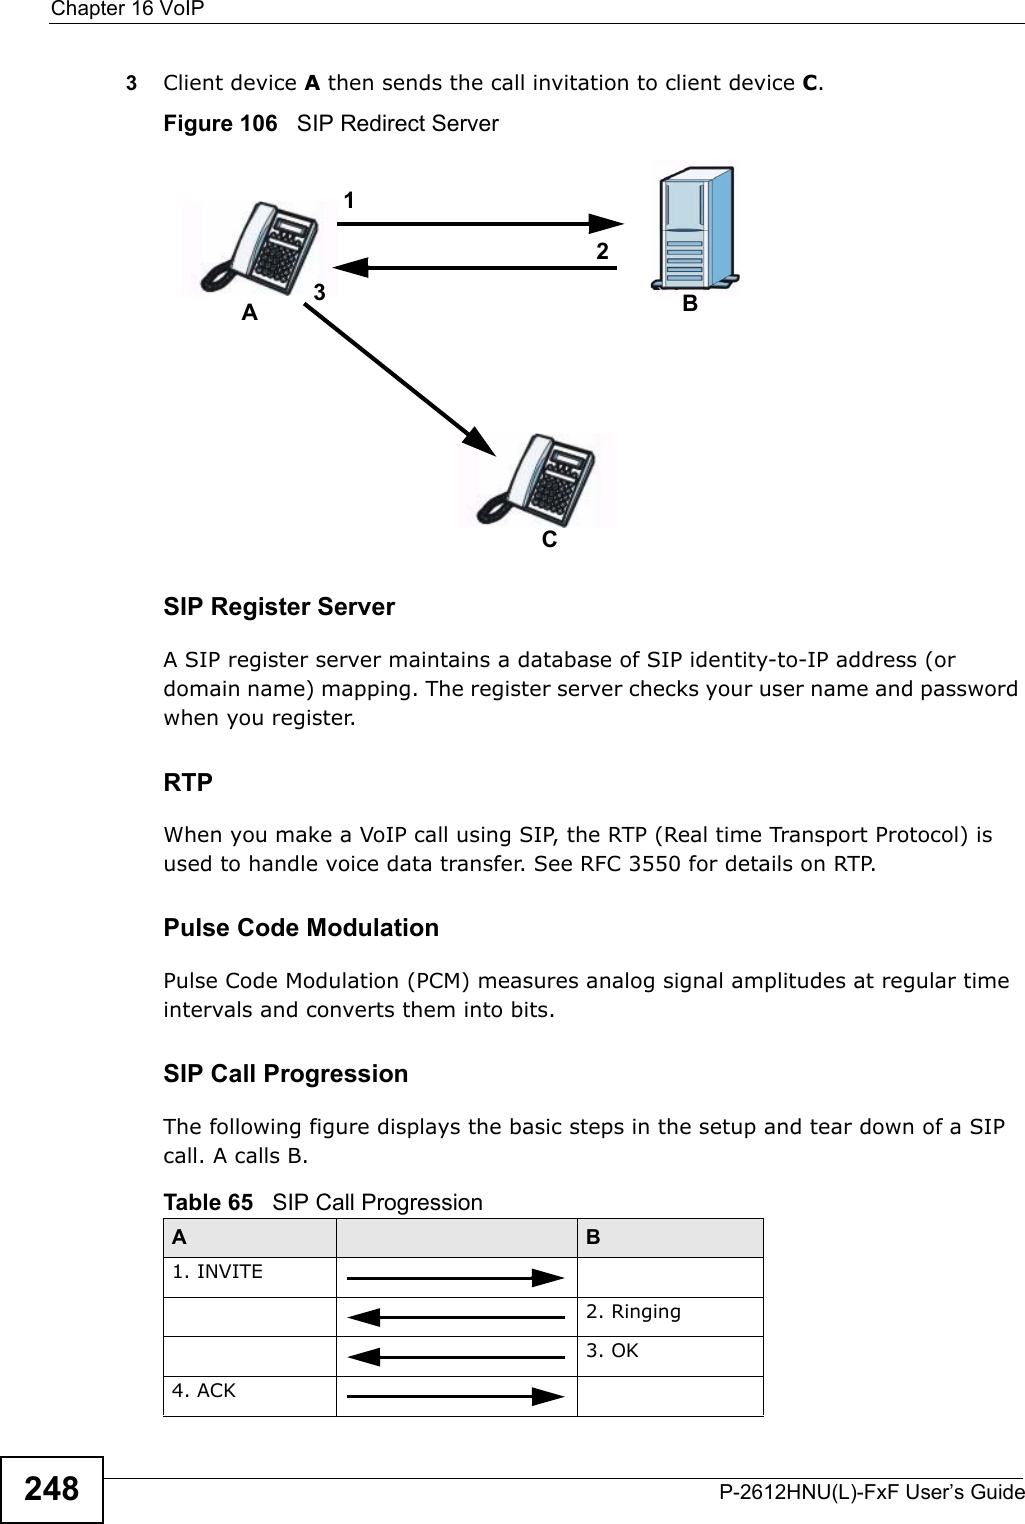 Chapter 16 VoIPP-2612HNU(L)-FxF User’s Guide2483Client device Athen sends the call invitation to client device C.Figure 106   SIP Redirect ServerSIP Register ServerA SIP register server maintains a database of SIP identity-to-IP address (or domain name) mapping. The register server checks your user name and passwordwhen you register. RTPWhen you make a VoIP call using SIP, the RTP (Real time Transport Protocol) is used to handle voice data transfer. See RFC 3550 for details on RTP.Pulse Code ModulationPulse Code Modulation (PCM) measures analog signal amplitudes at regular time intervals and converts them into bits.SIP Call ProgressionThe following figure displays the basic steps in the setup and tear down of a SIP call. A calls B.Table 65   SIP Call ProgressionA B1. INVITE2. Ringing3. OK4. ACK 123ABC